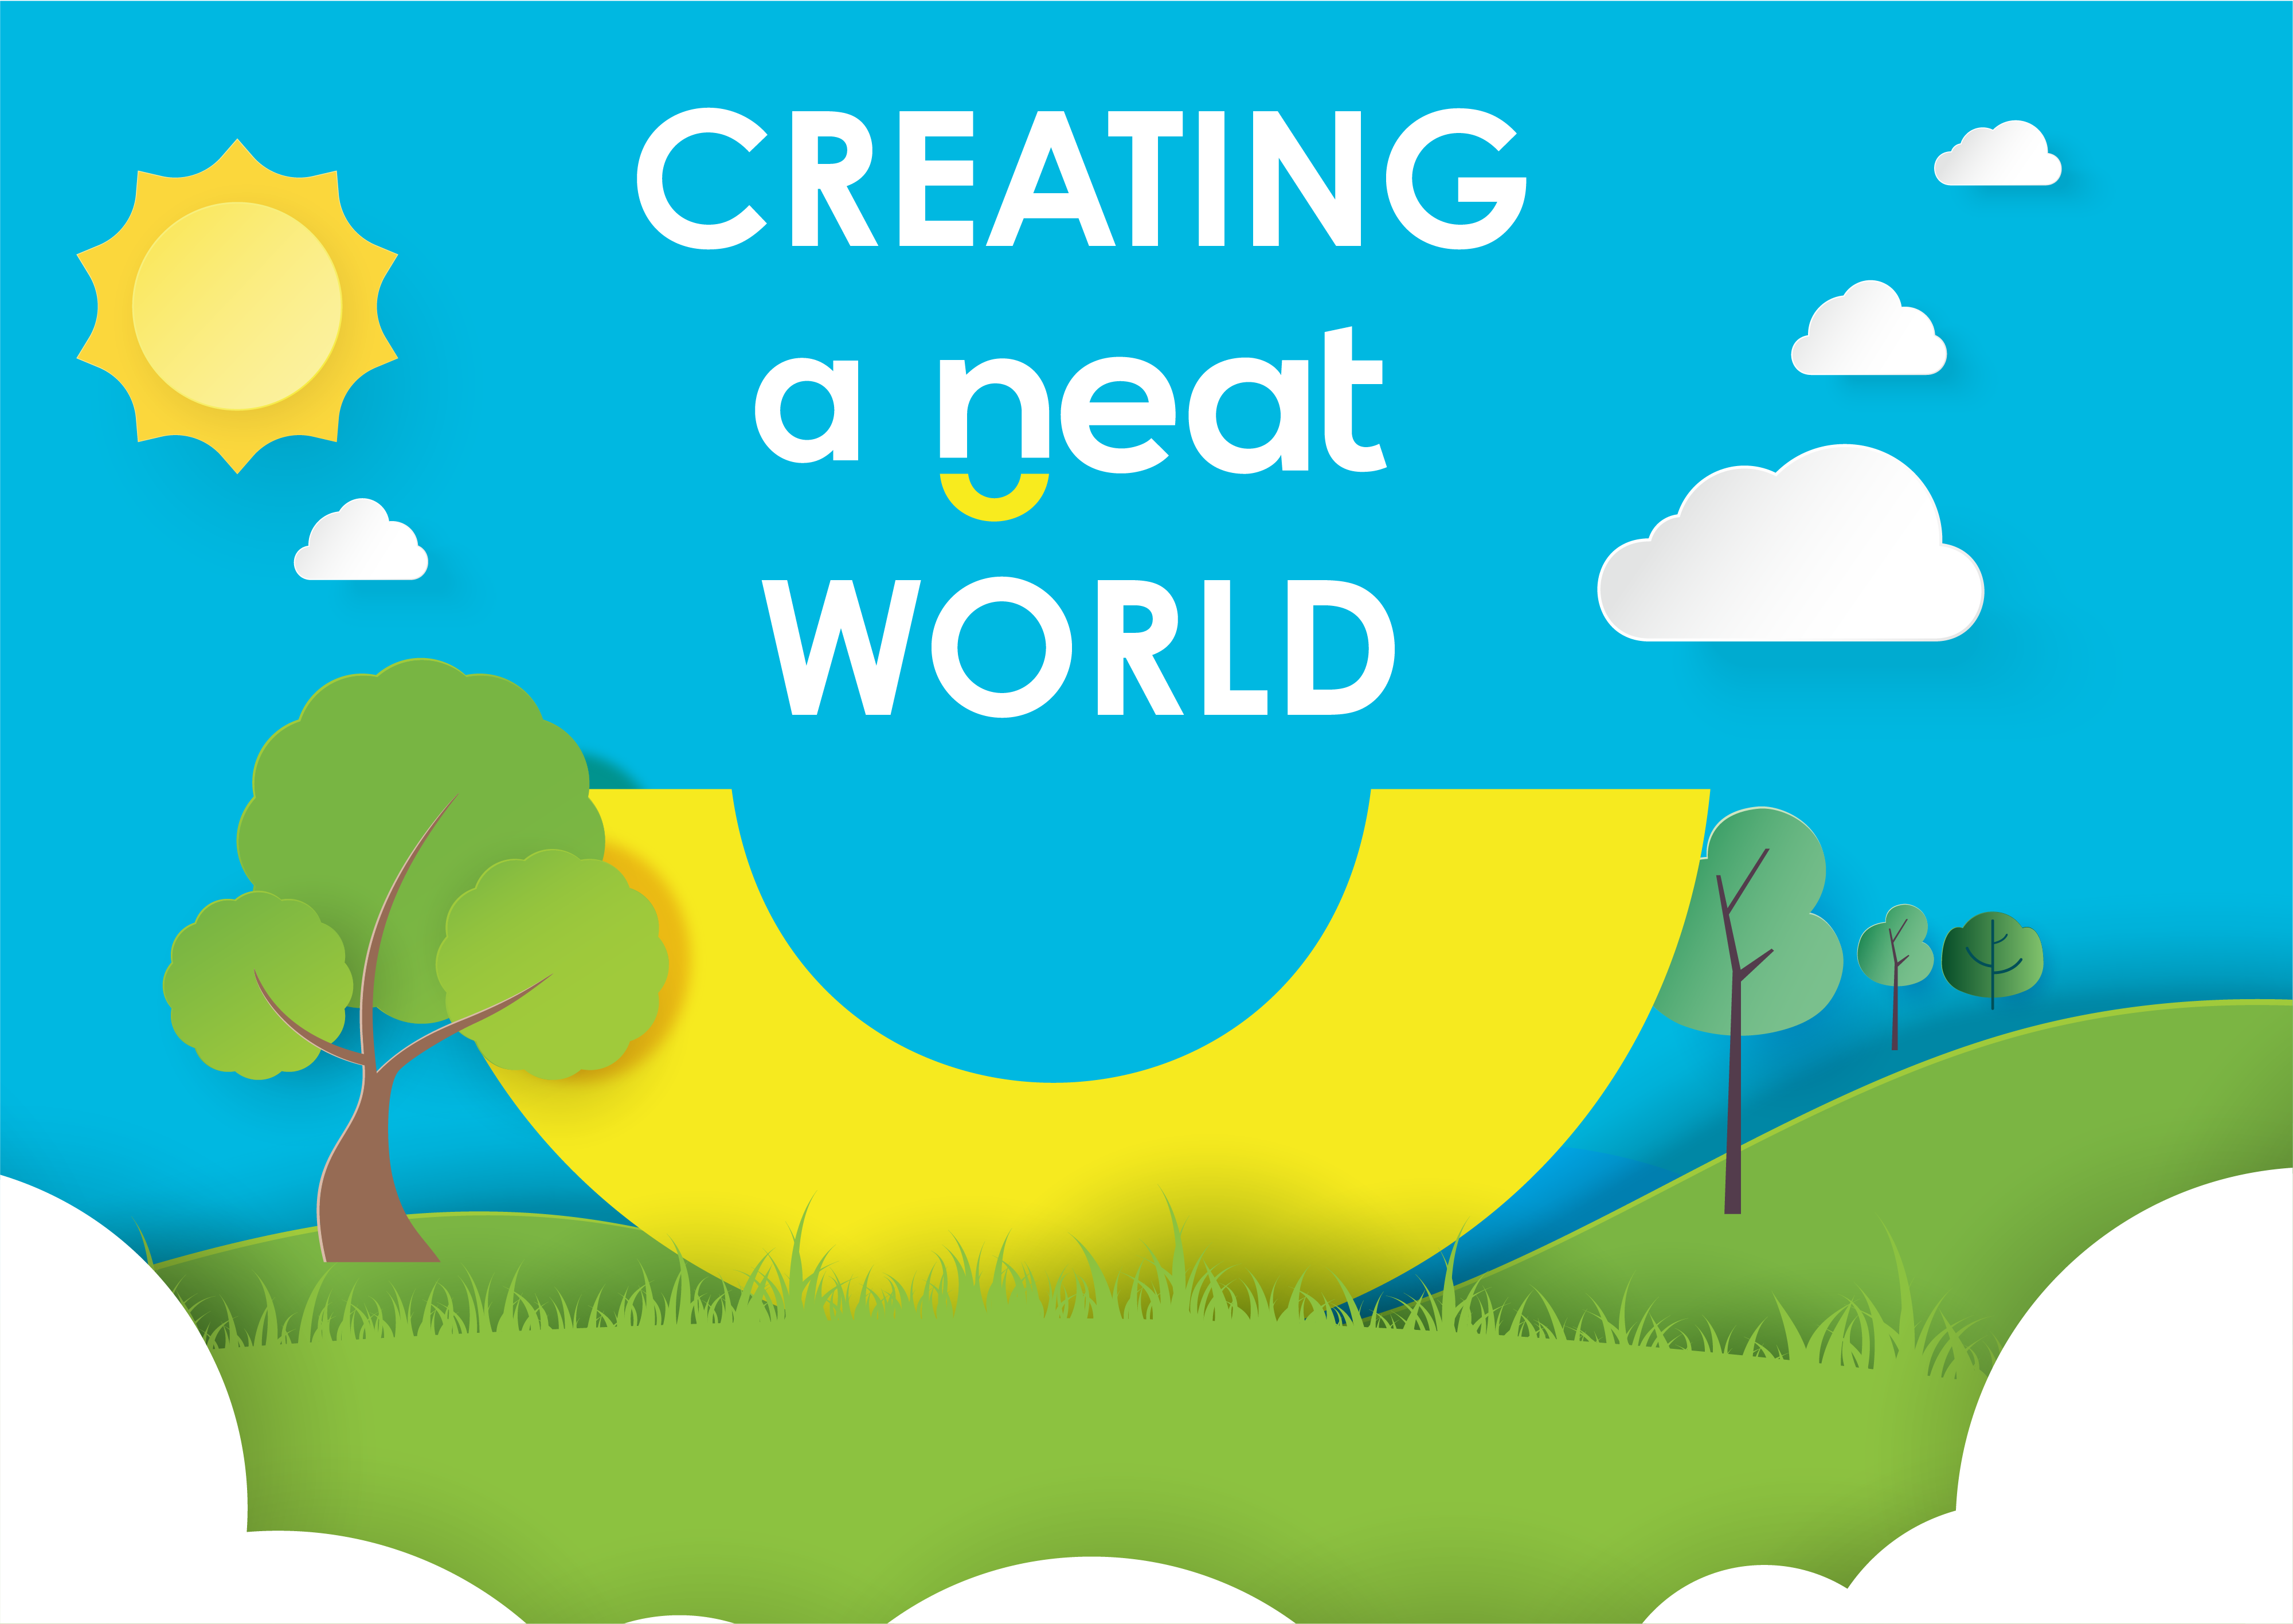 Neat_FAQs_Creating a neat world